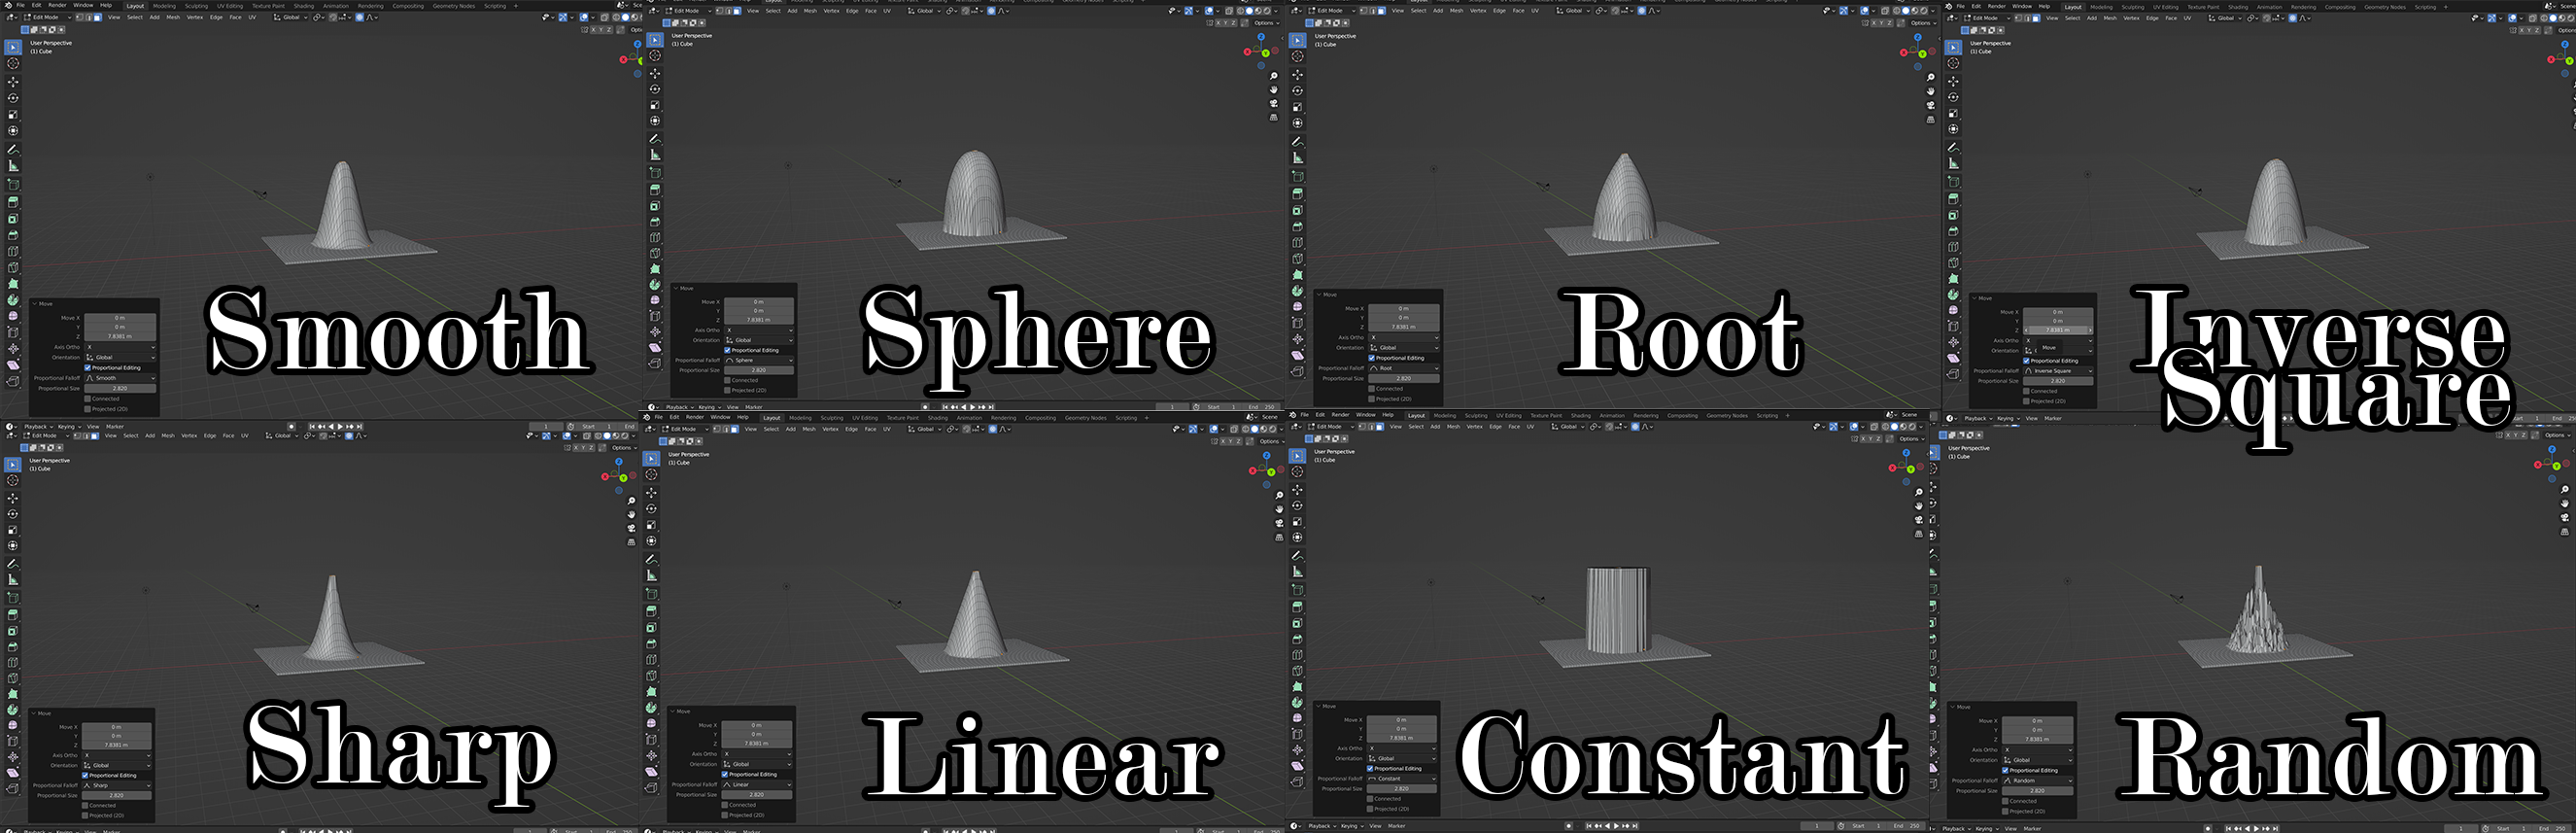 The different types of Proportional Editing in Blender.